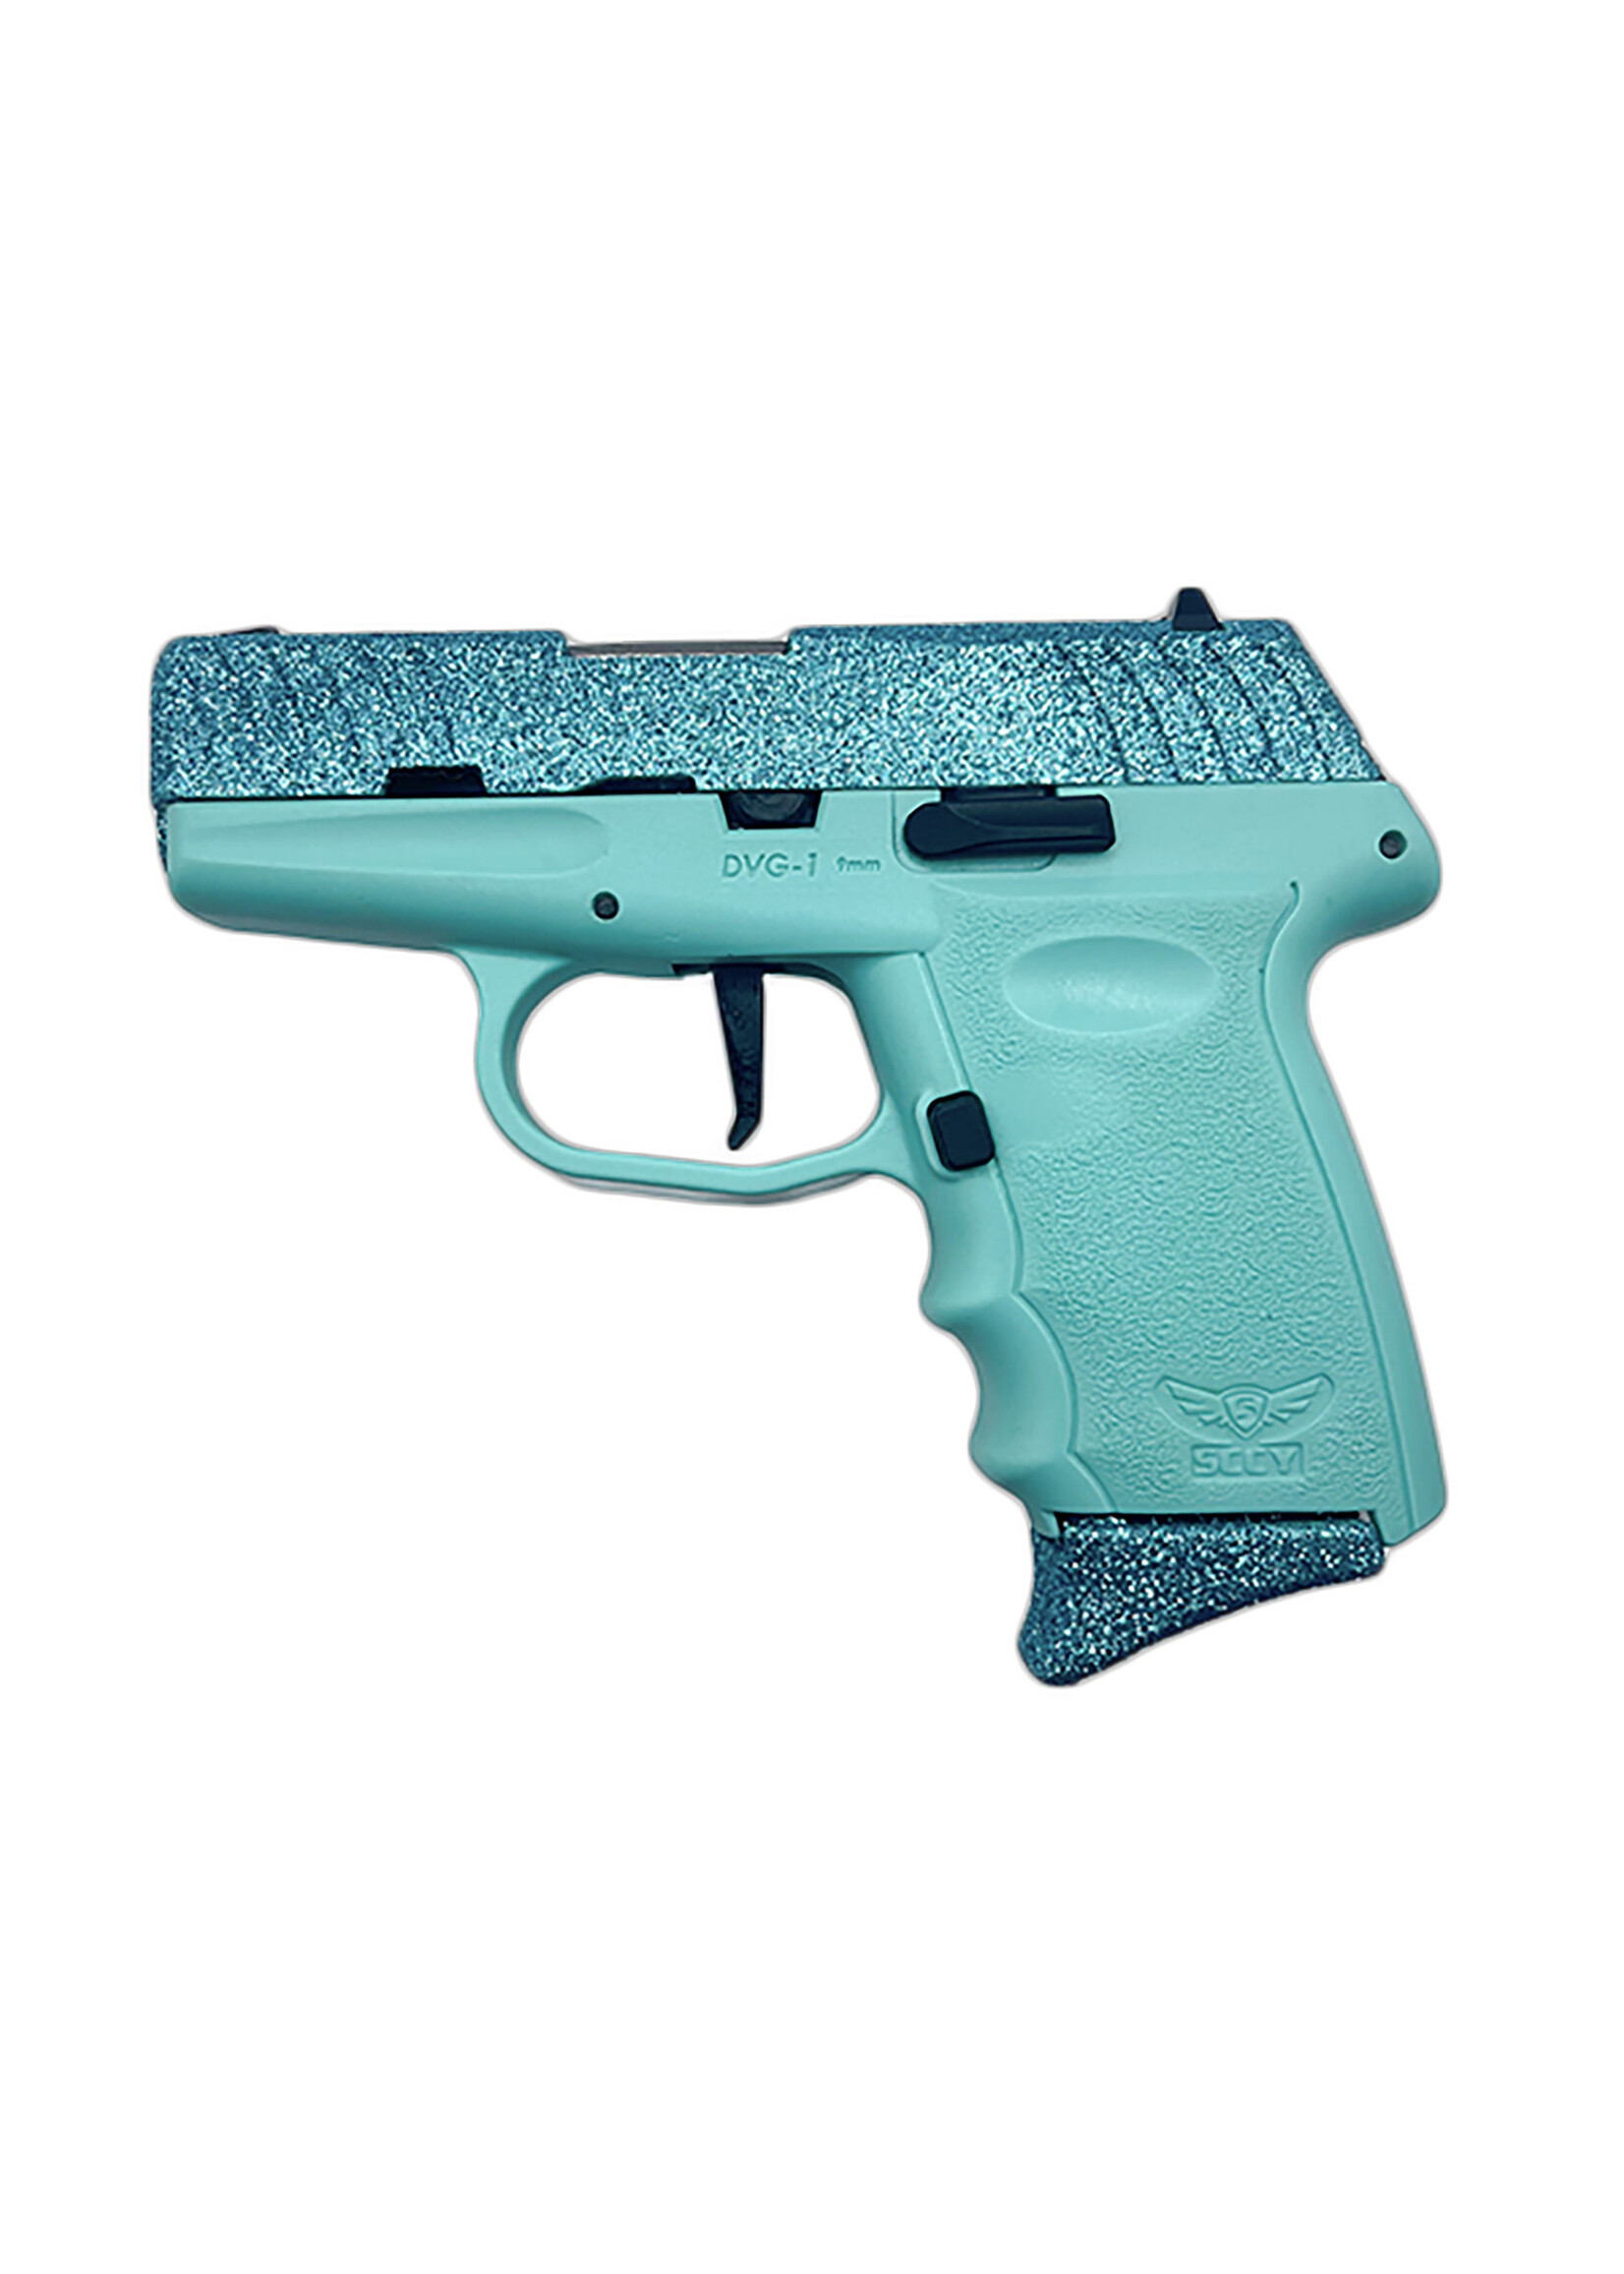 Sccy Industries SCCY Industries DVG1CYBSB DVG-1 Sub-Compact Frame 9mm Luger 10+1 3.10" Stainless Quadlock Barrel Cystal Blue Glitter Optic Ready/Serrated Stainless Steel Slide, Crystal Blue Polymer Frame & Grip